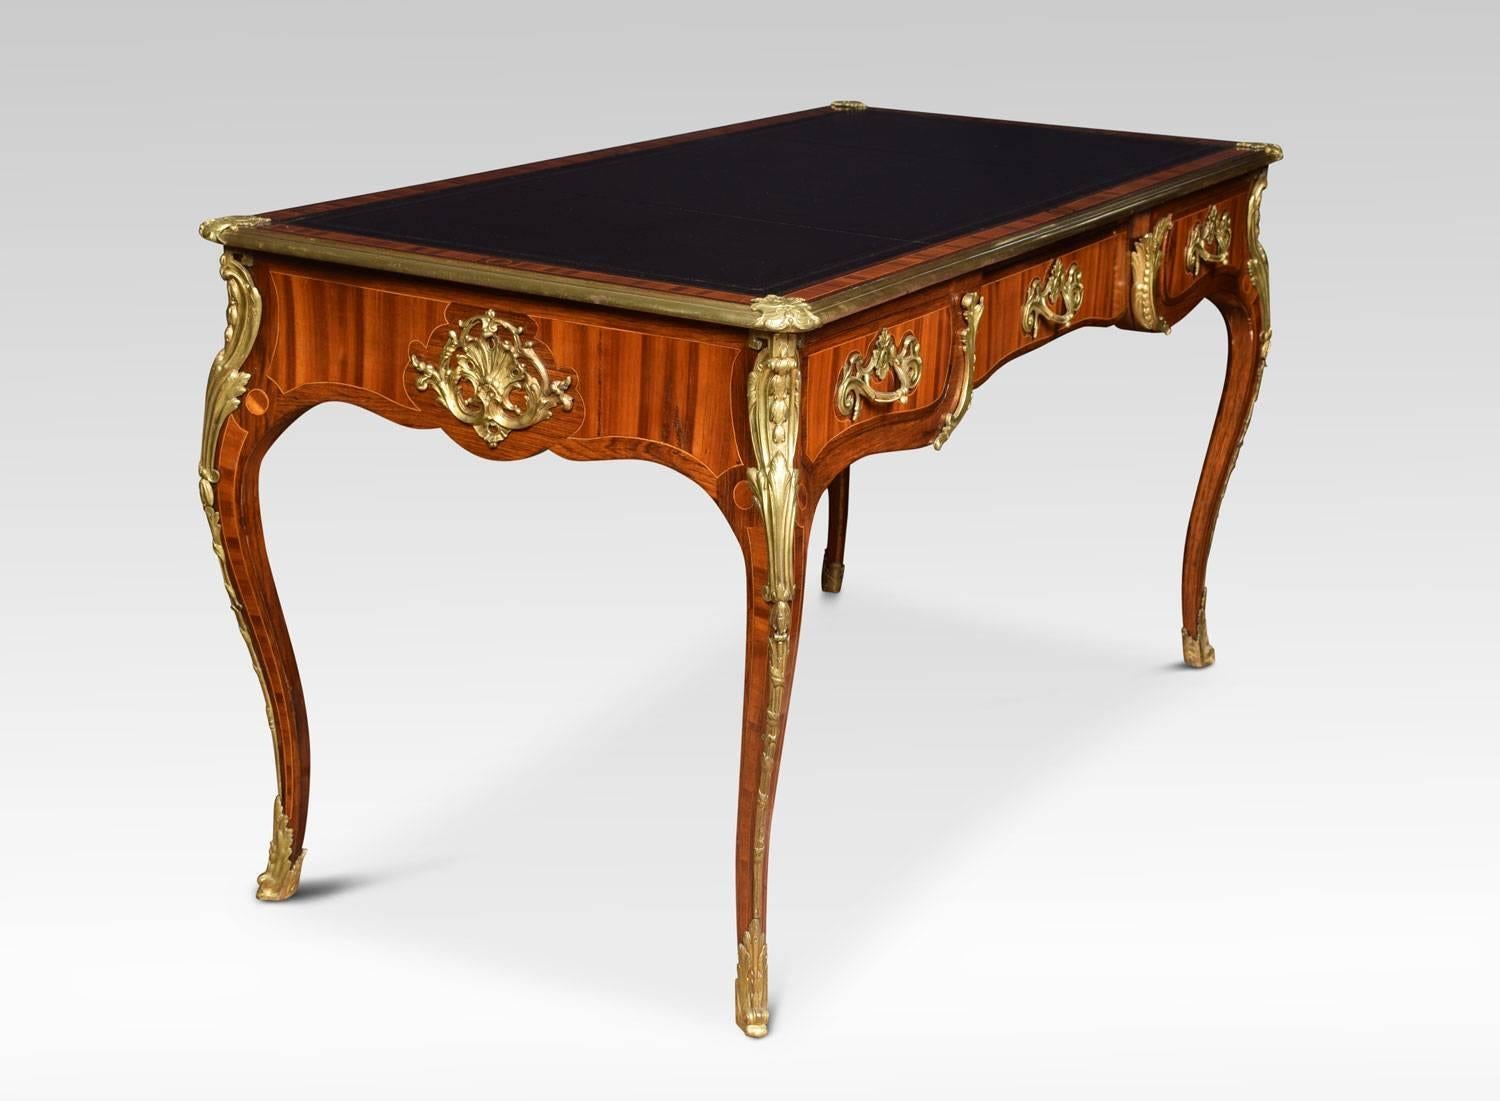 19th century bronze-mounted tulipwood and rosewood crossbanded bureau plat, the shaped top with gilt bronze border and tooled black leather inset writing surface above three frieze drawers, the reverse similarly decorated with false draws, raised up